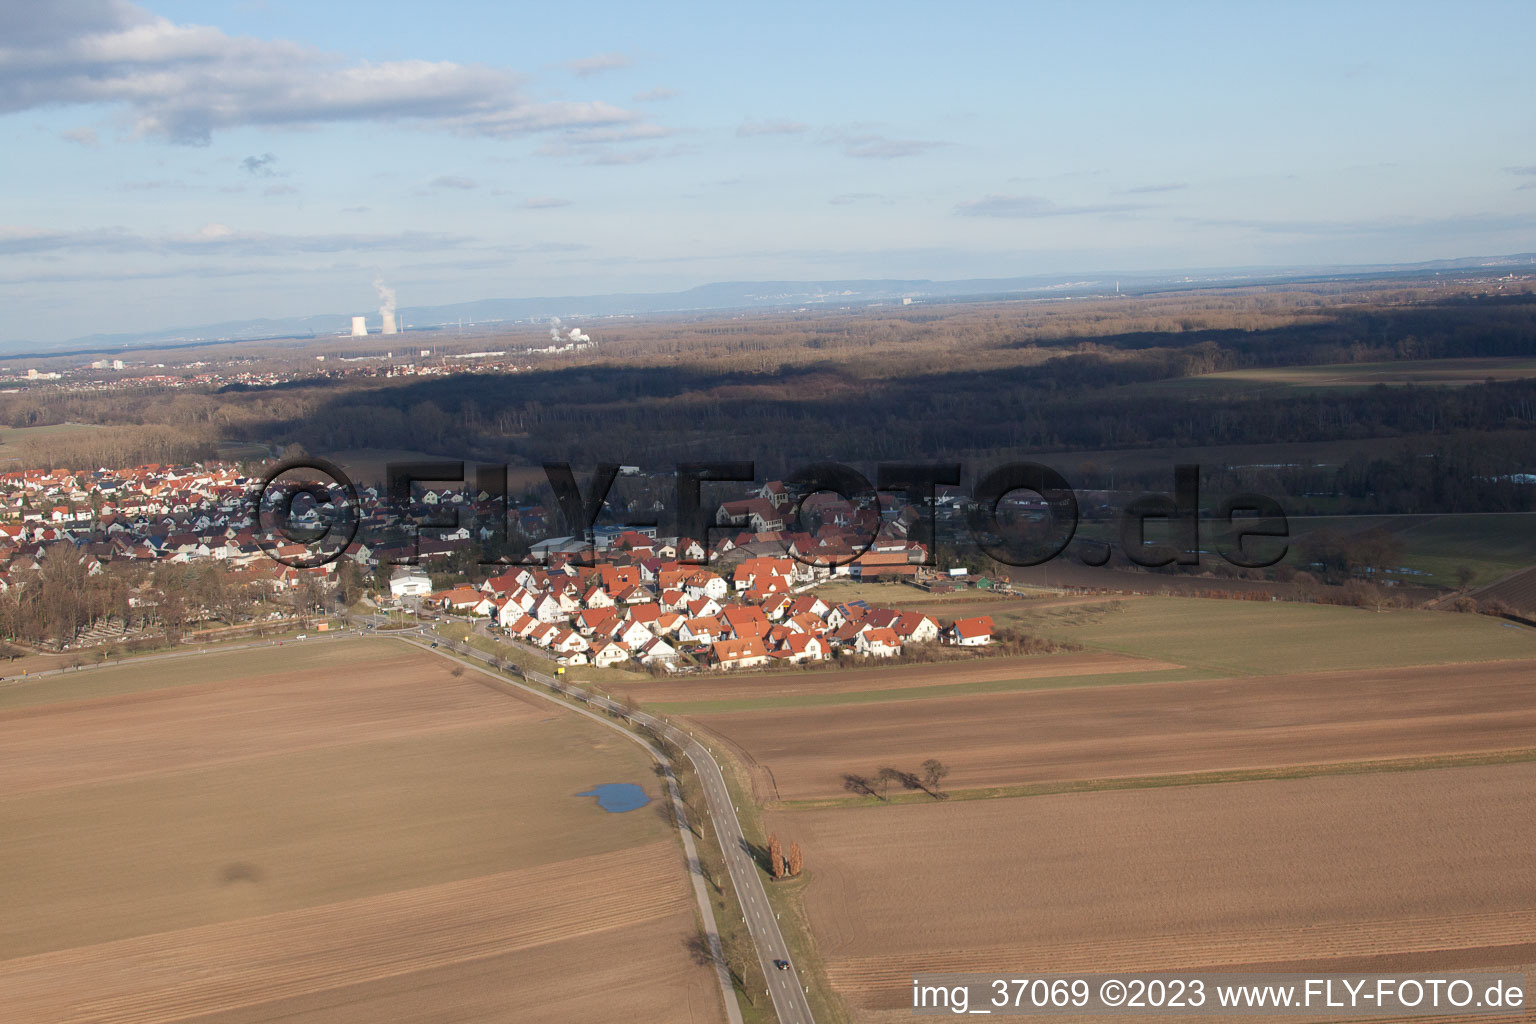 Aerial photograpy of Hördt in the state Rhineland-Palatinate, Germany